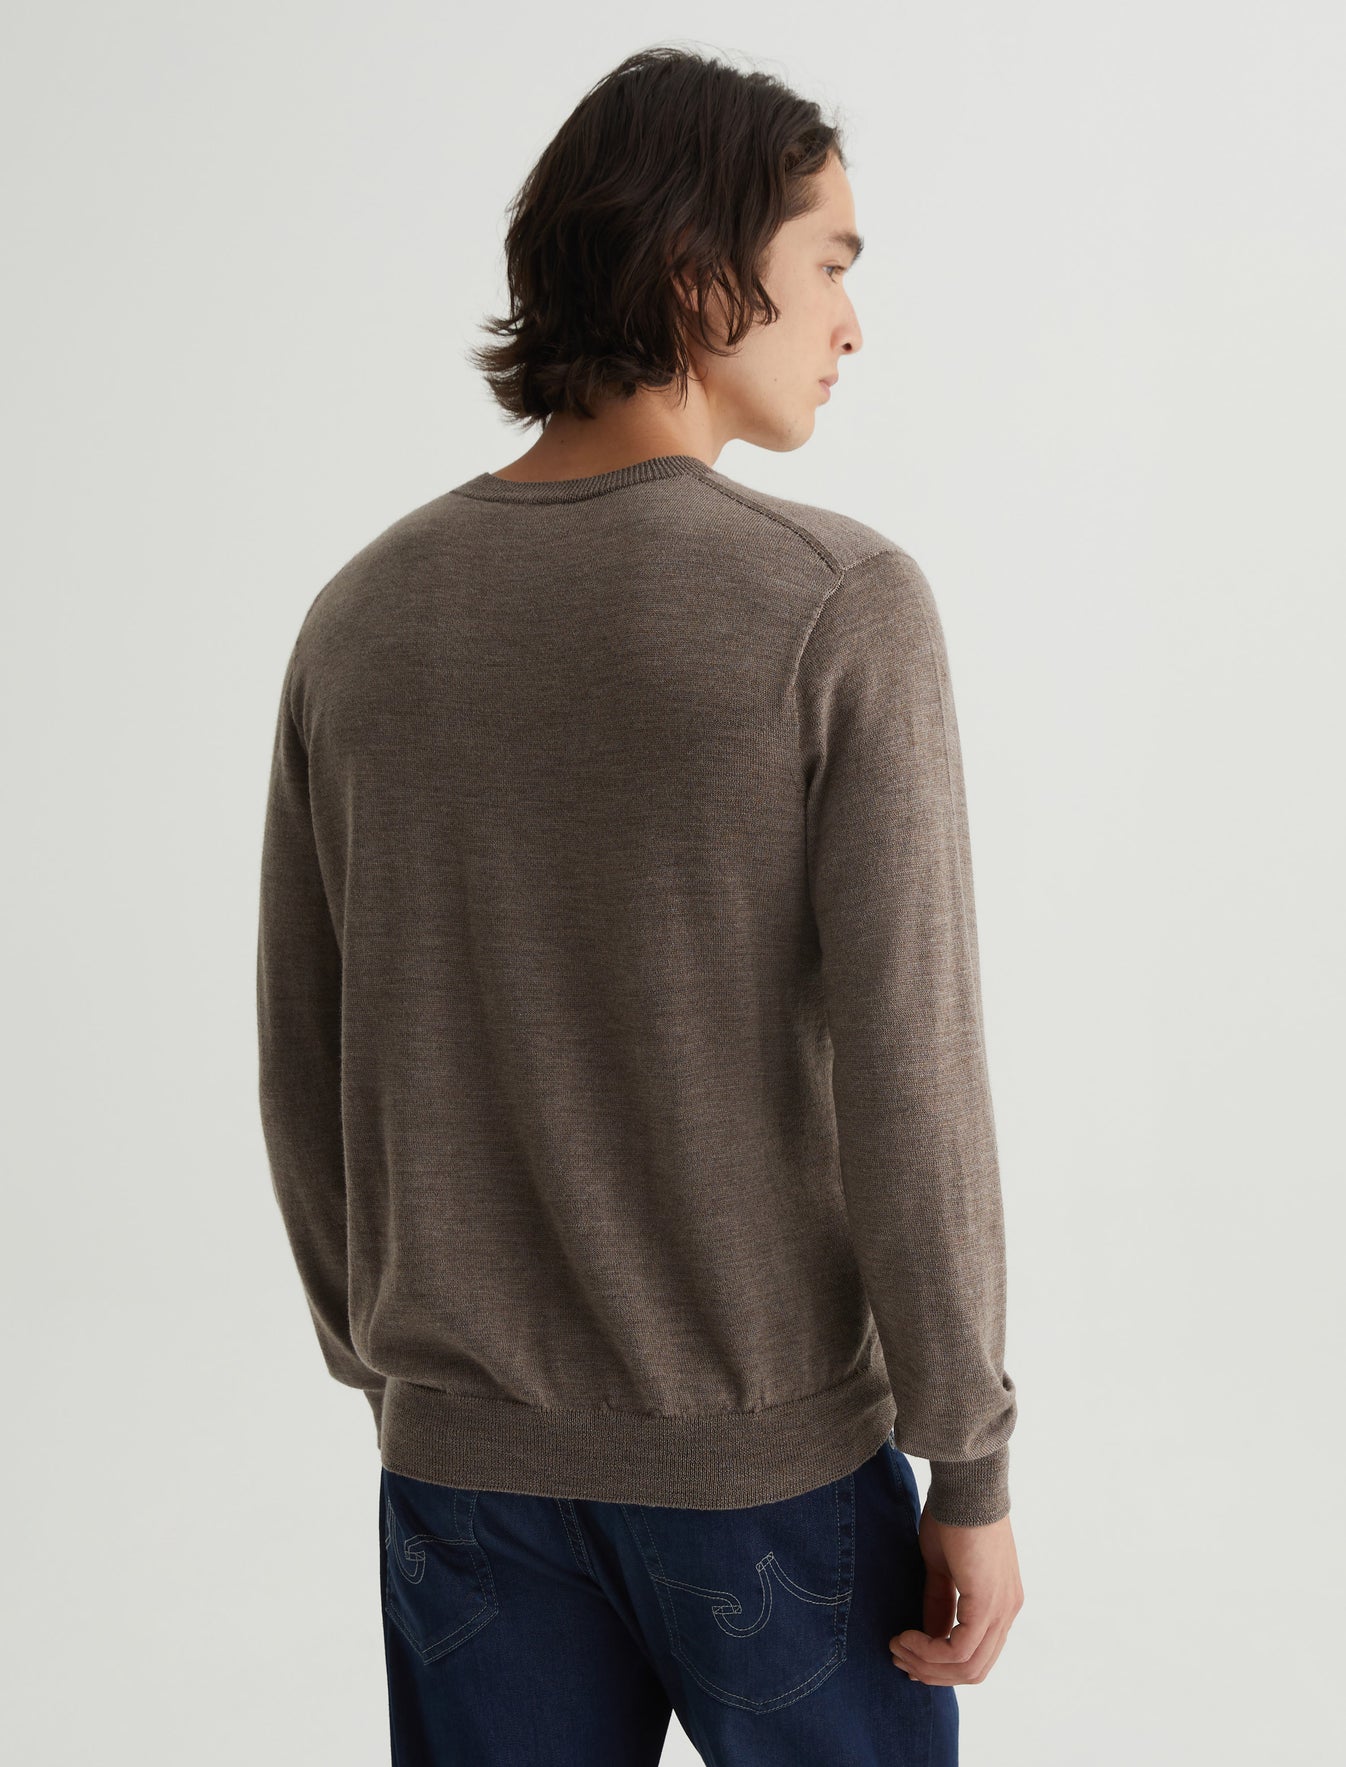 Beck Crew Melange Taupe Classic Fit Long Sleeve Crew Neck Sweater Mens Top Photo 6